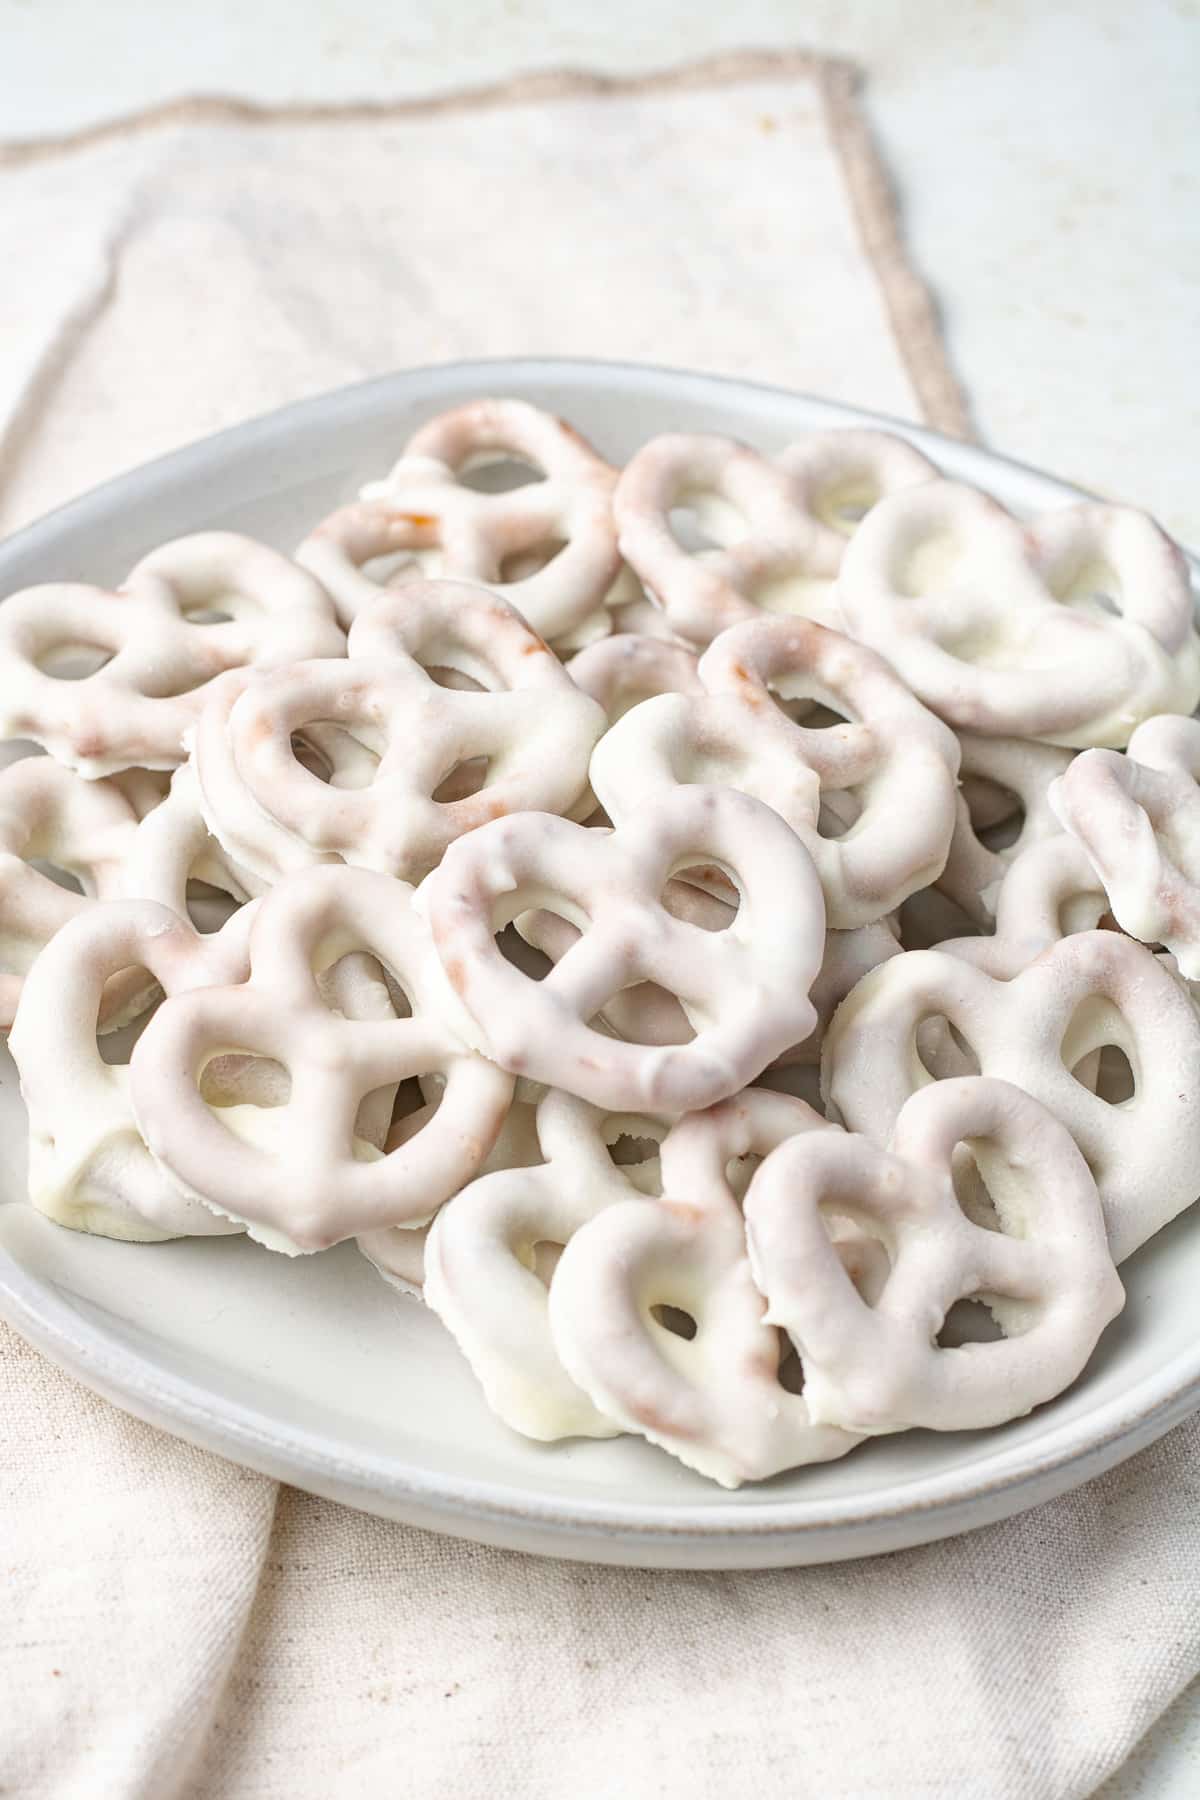 White chocolate pretzels on a plate.